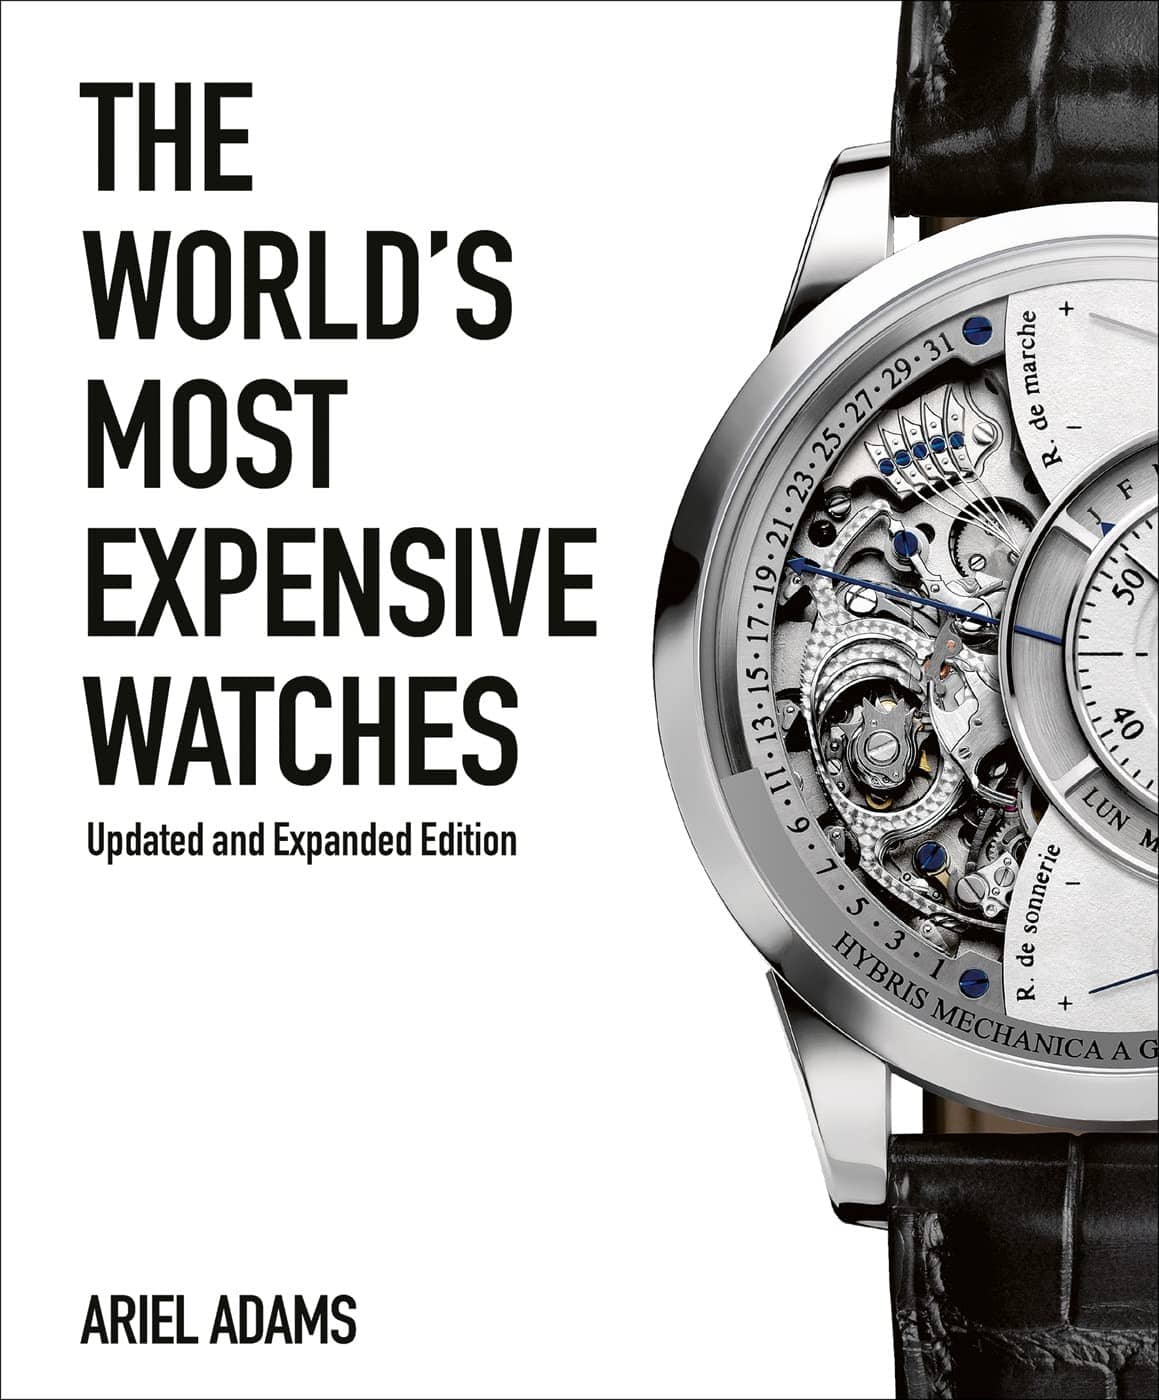 15097-the-world-s-most-expensive-watches-pages-from-iznik-60-61-scaled